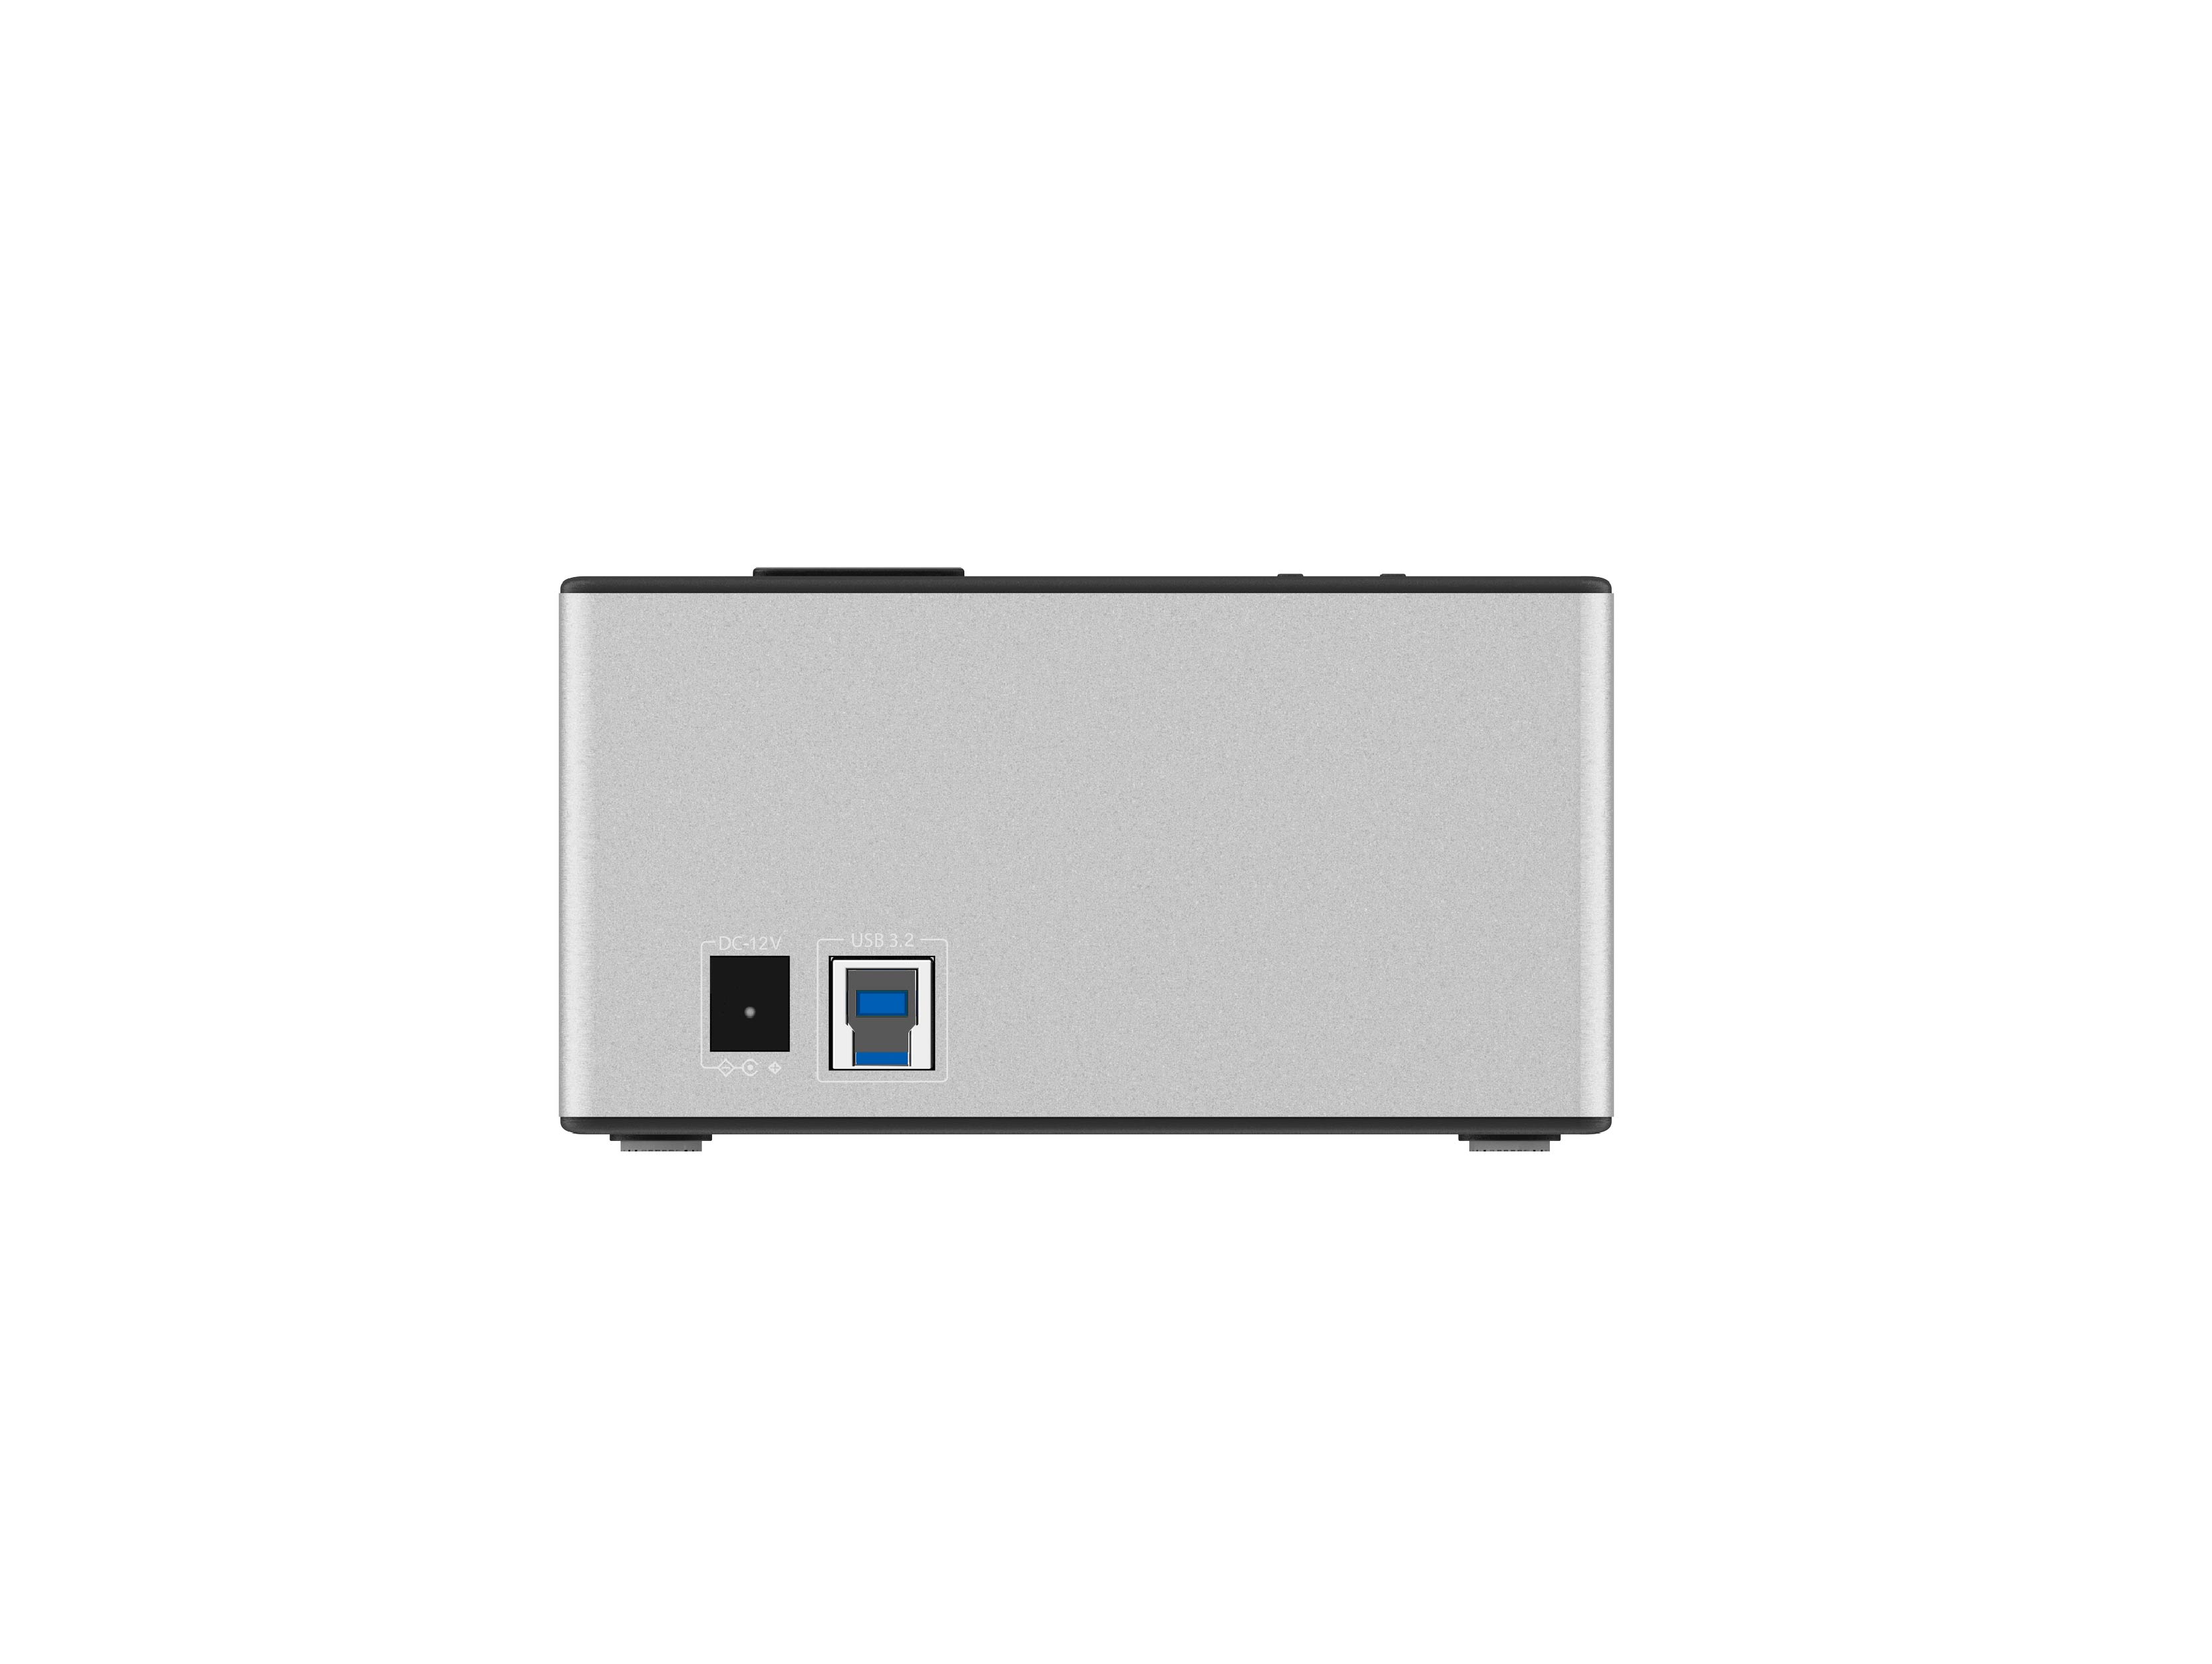 4 Bay SATA SSD/HDD Duplicator (SI-7945USJ3-D), applicable 4 3.5" or 2.5" SATA HDD/SSD, support PC mode & clone mode switchable, USB-C 5Gbps to host.